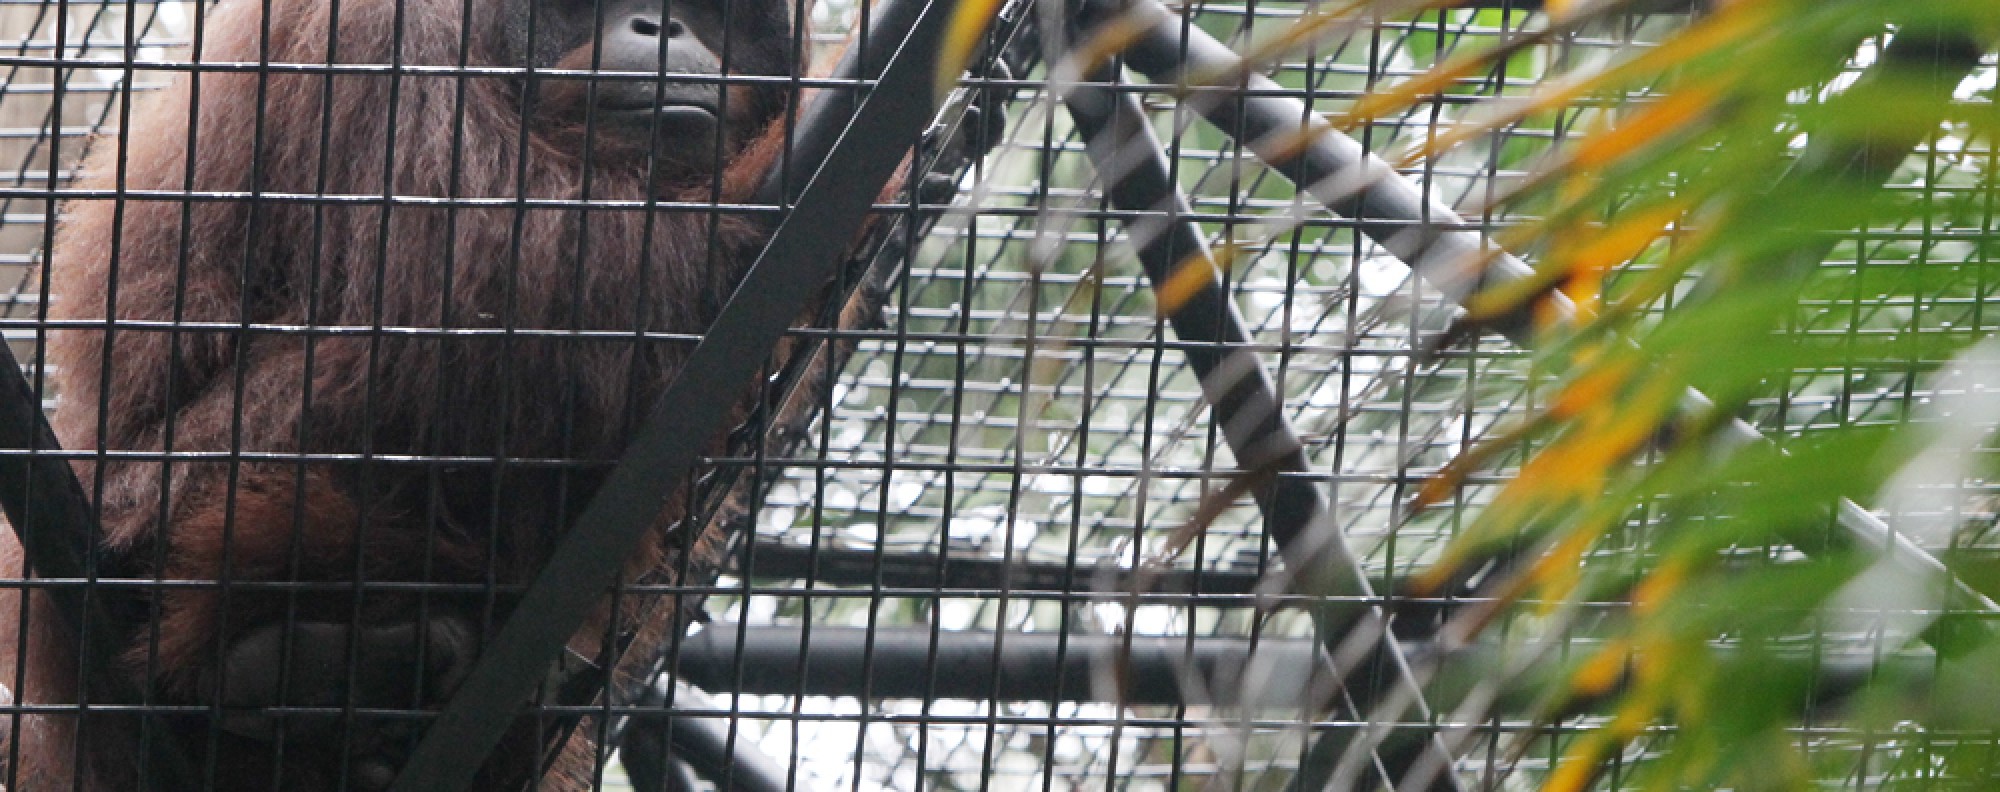 Opening another zoo will send wrong message to children | South China  Morning Post